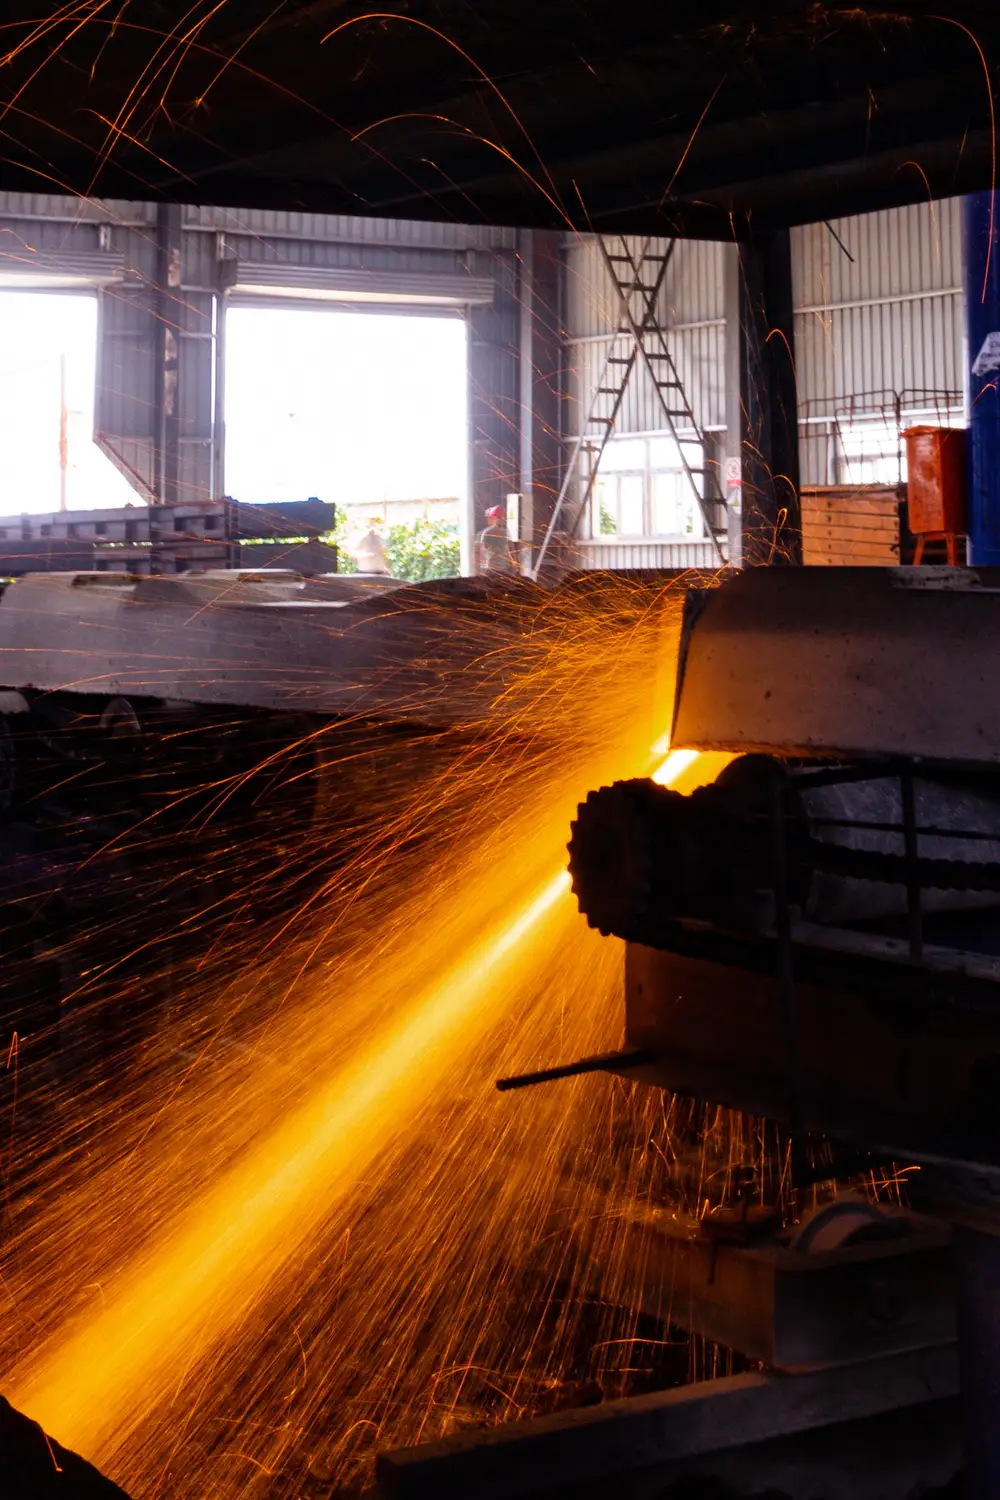 Casting of metal in the factory